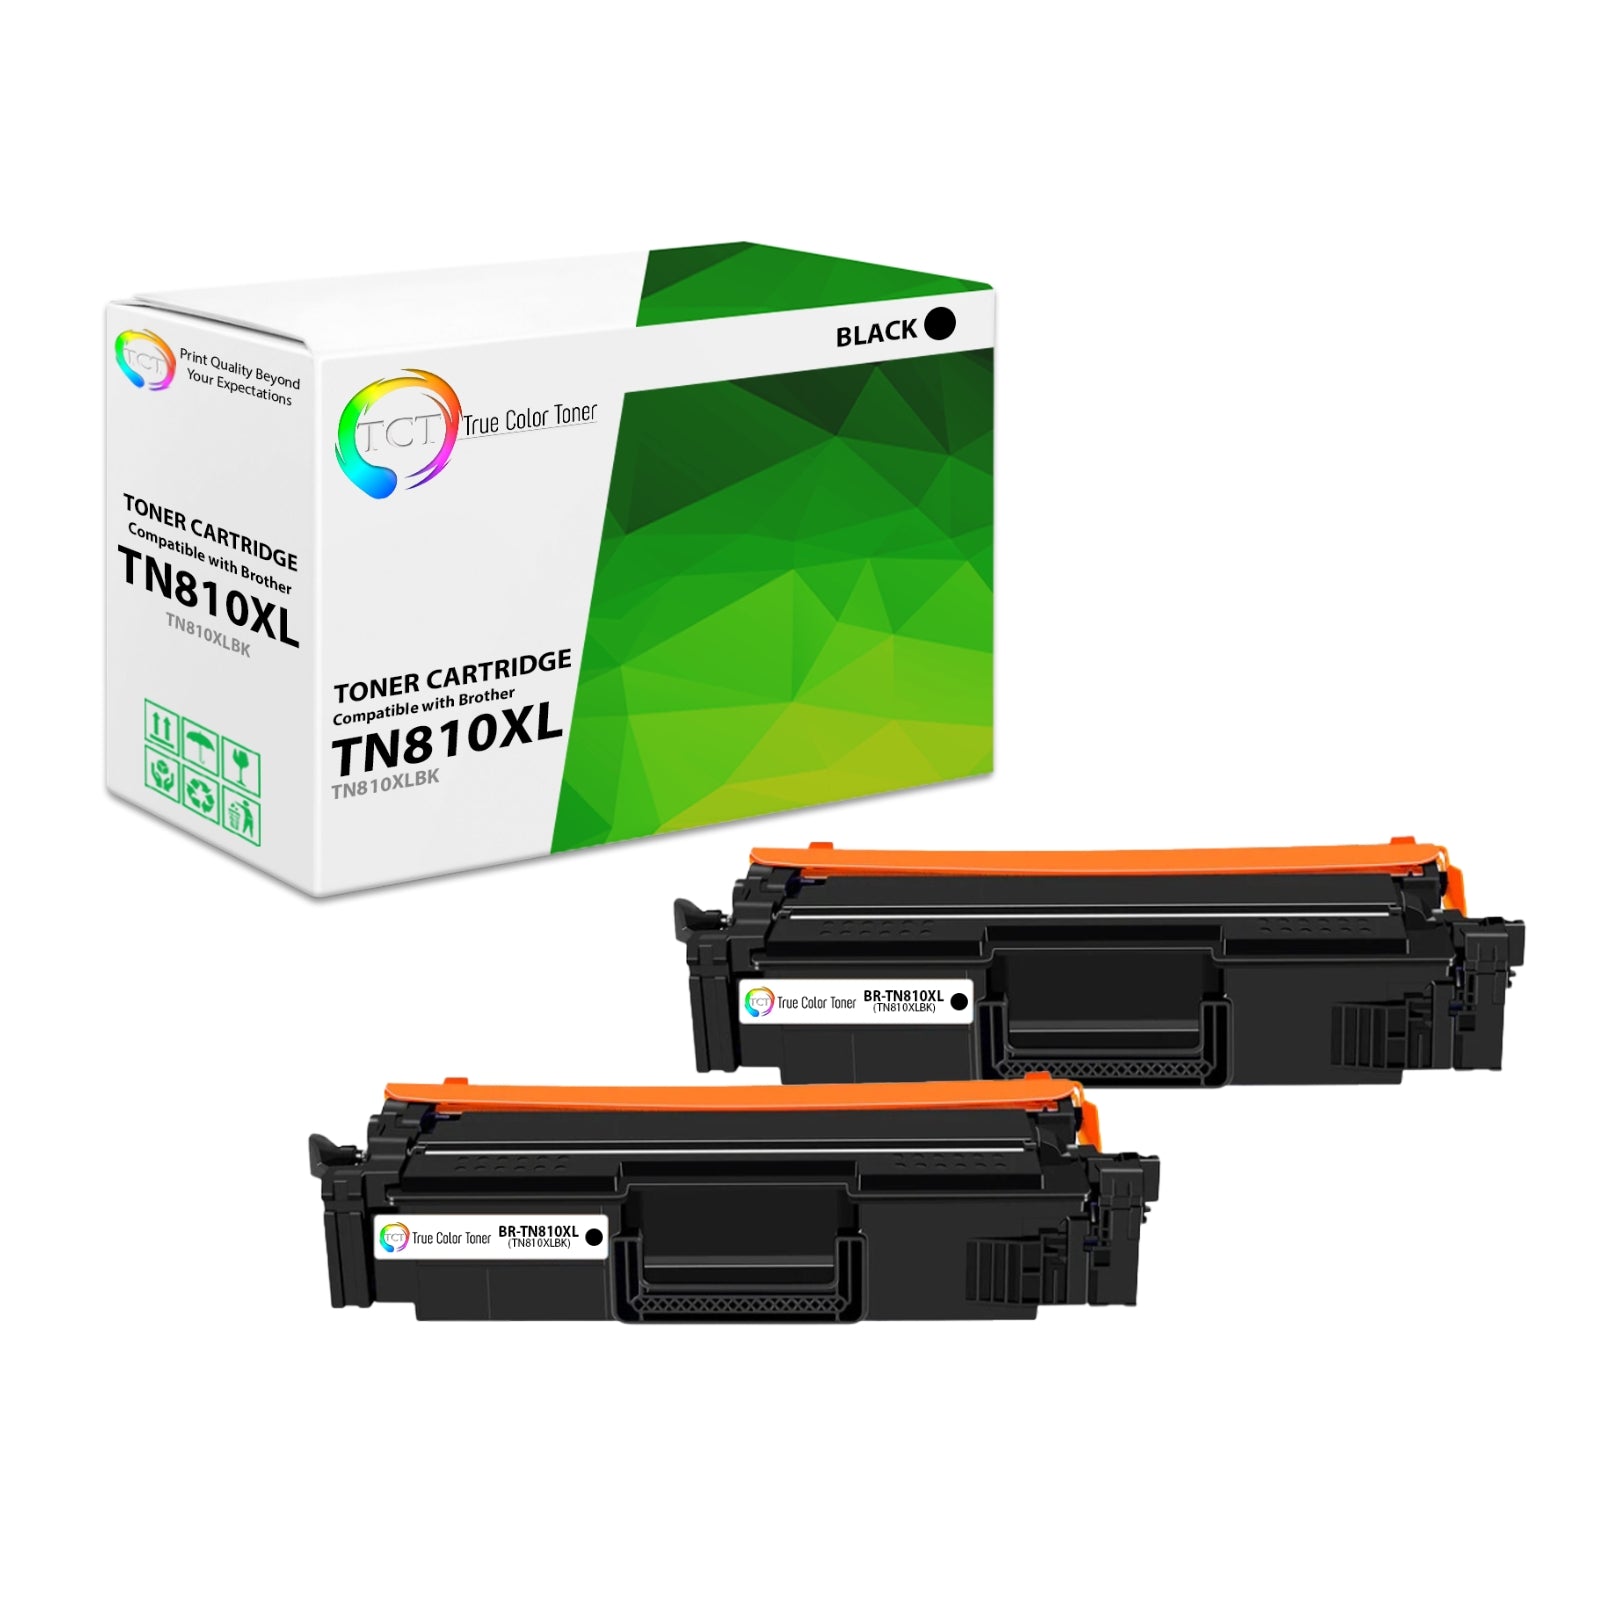 TCT Compatible Toner HY Cartridge Replacement for the Brother TN-810 Series - 2 Pack Black